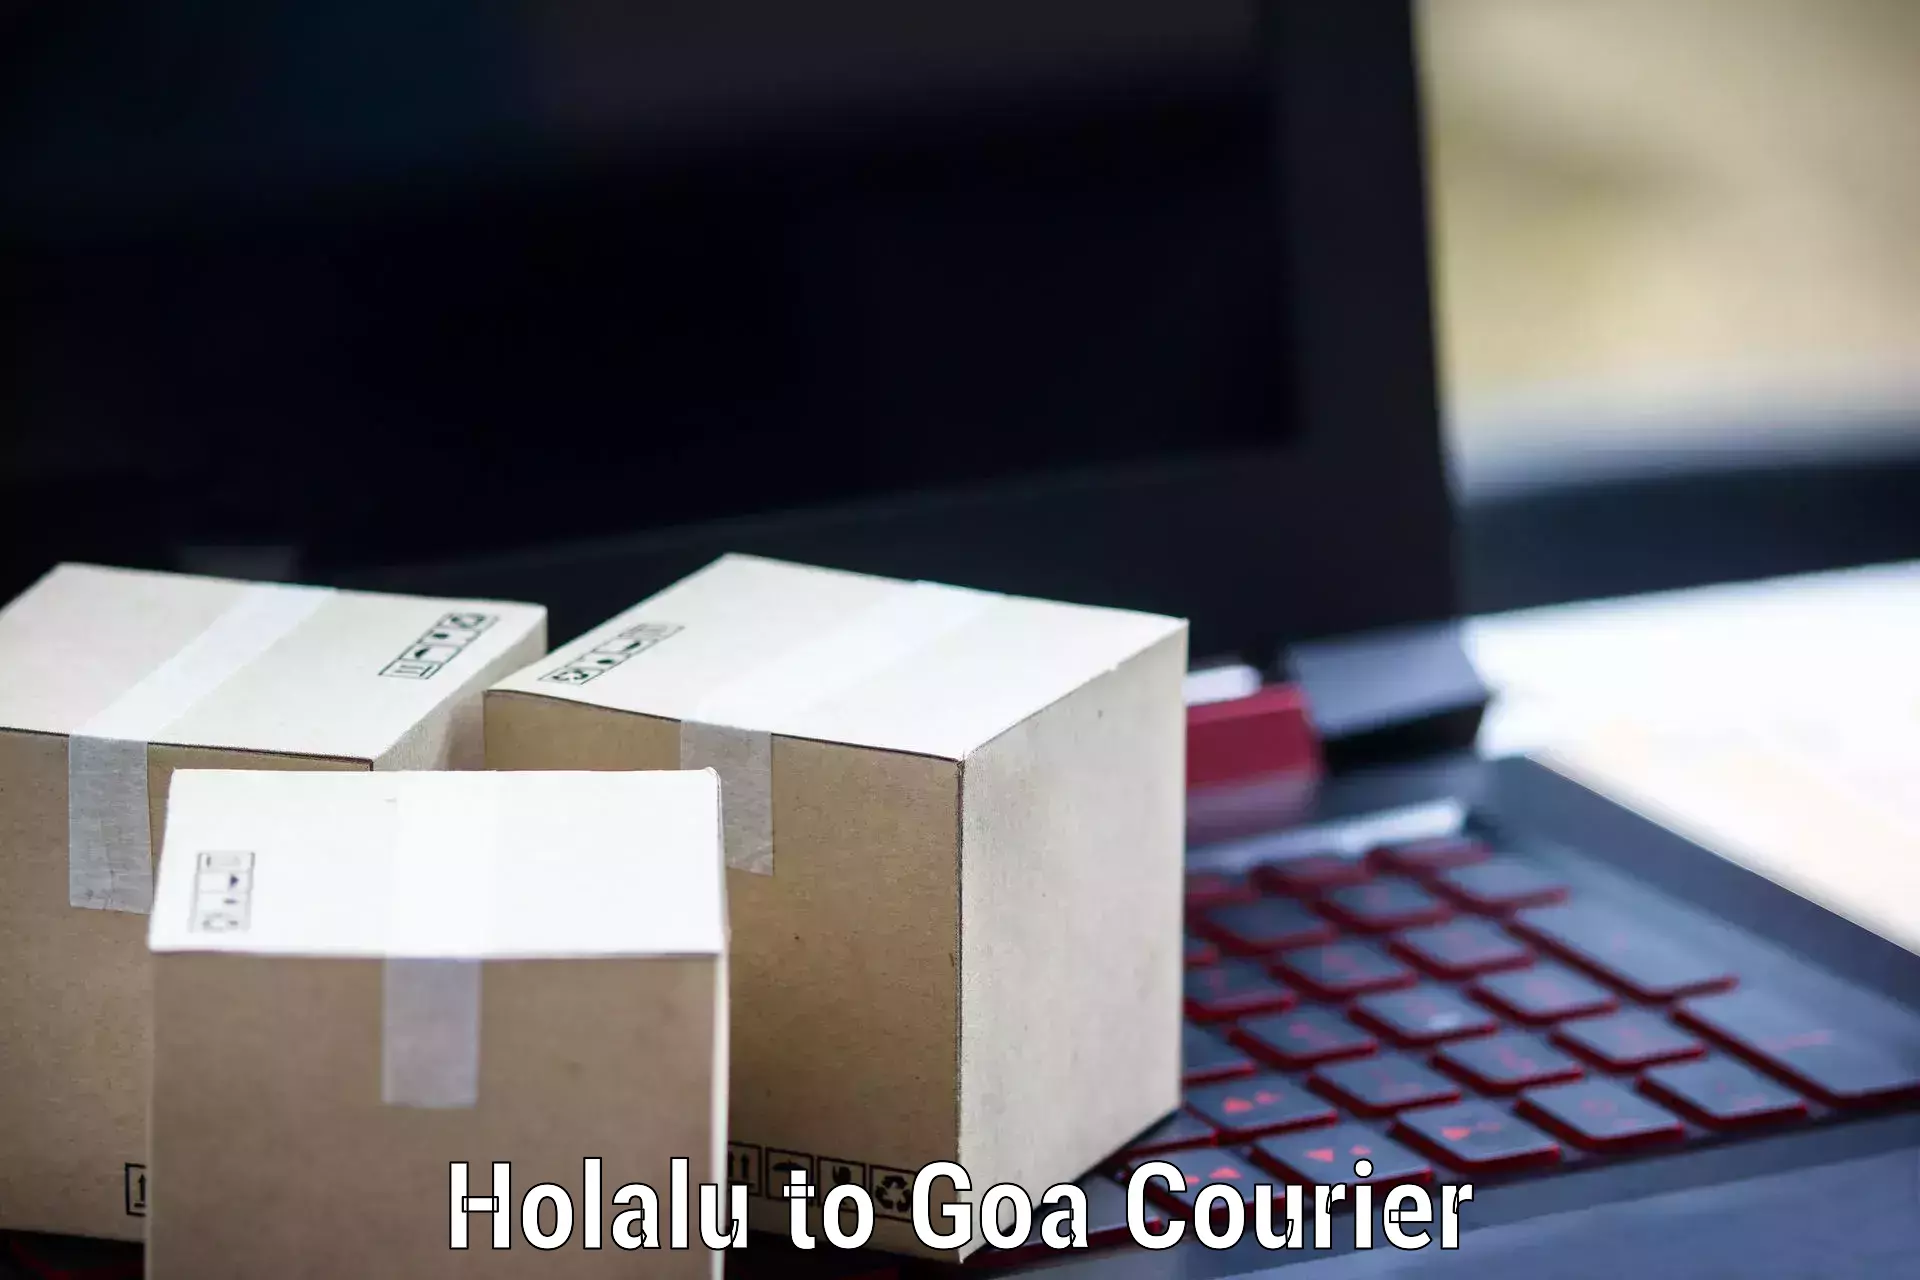 Global courier networks Holalu to Goa